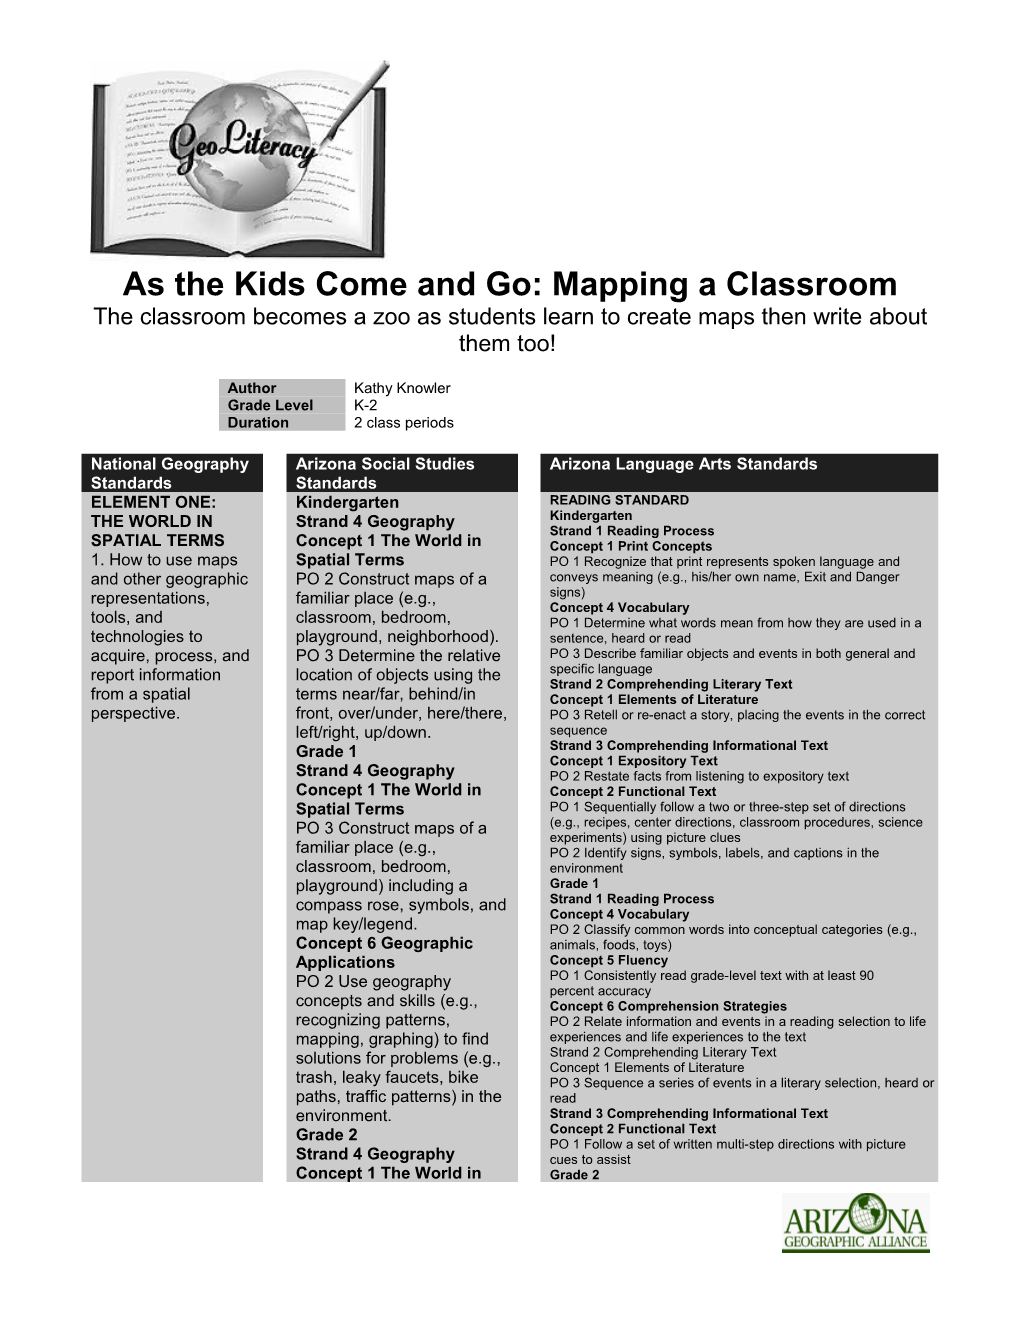 As the Kids Come and Go: Mapping a Classroom